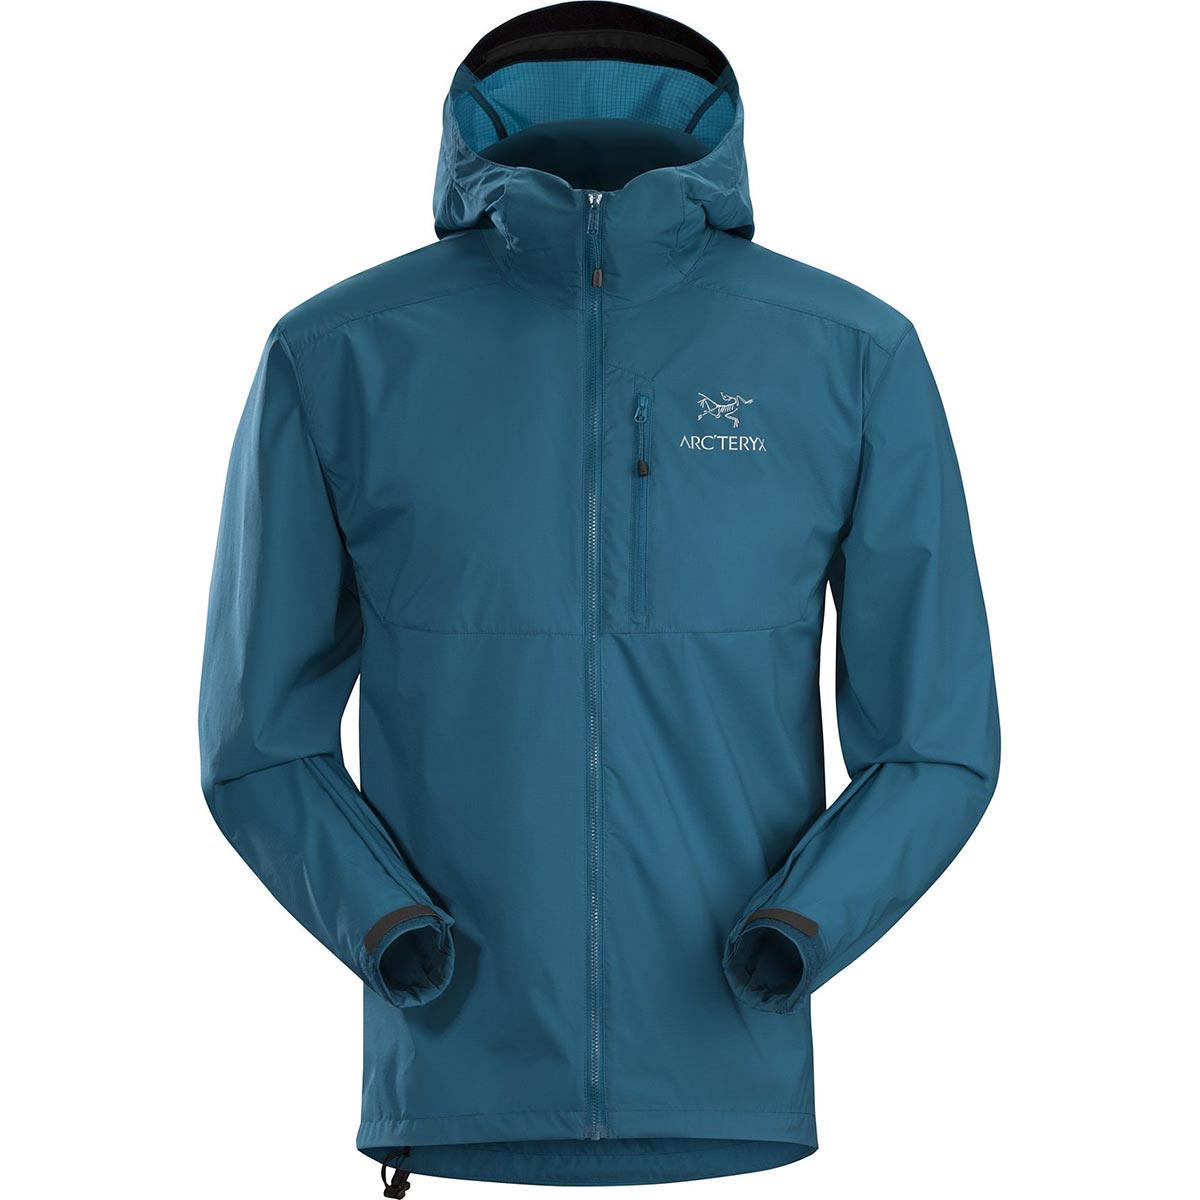 Squamish Hoody, men's, discontinued Fall 2019 model